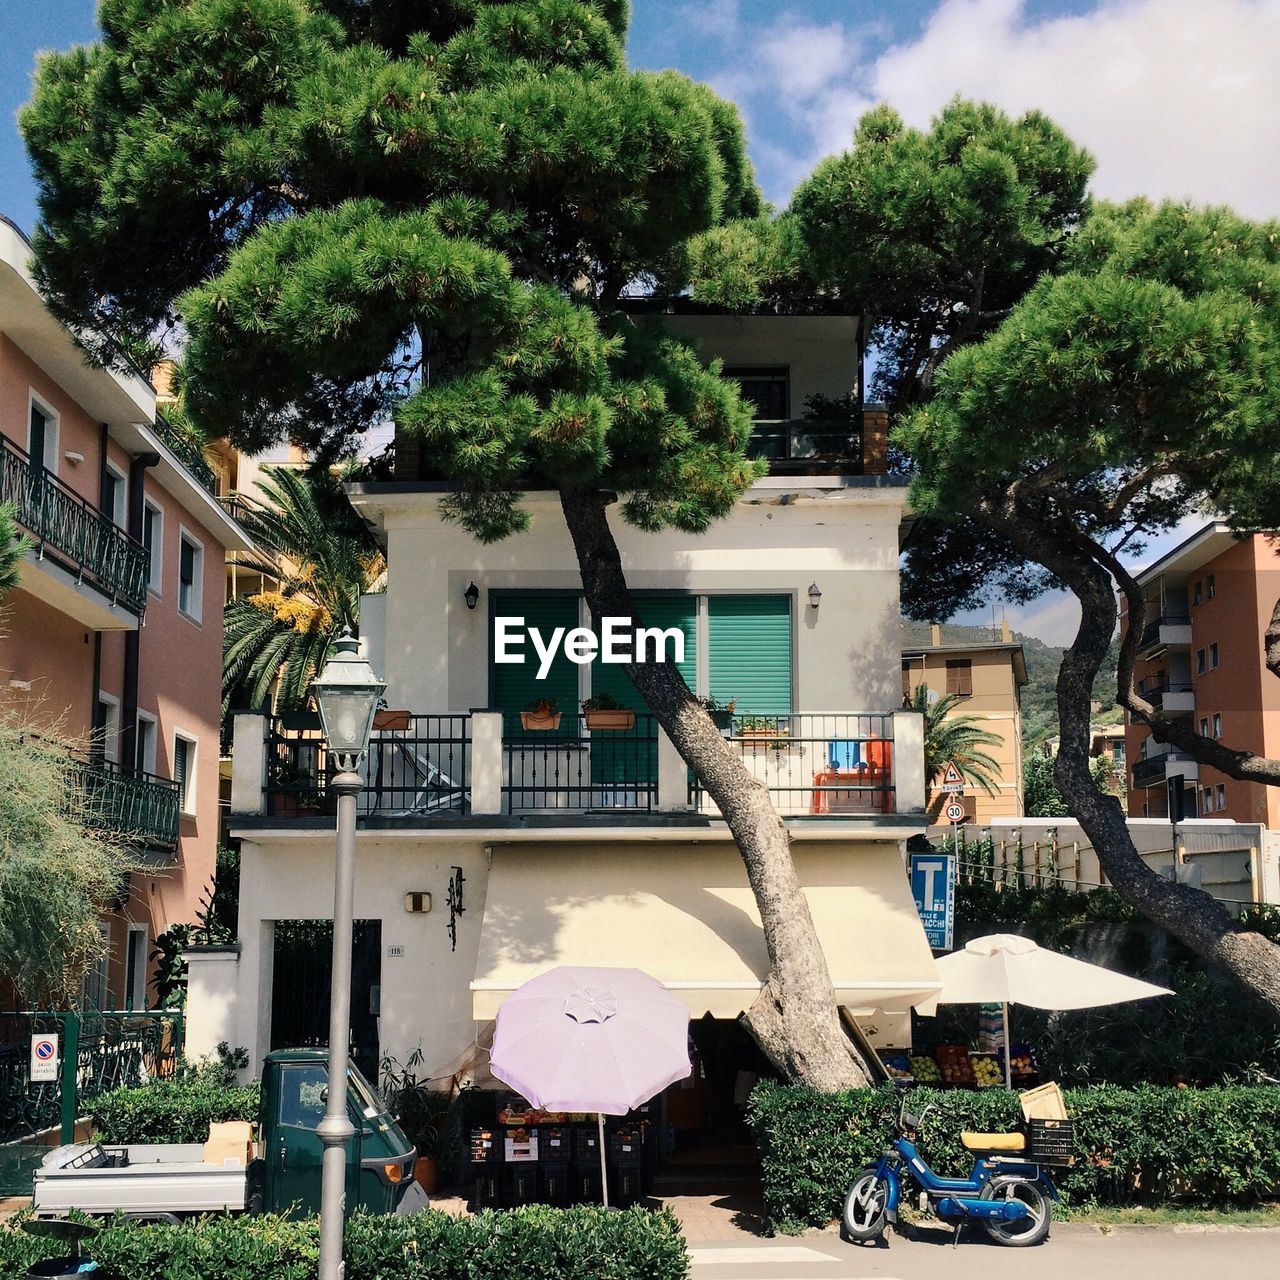 Houses and tree at monterosso al mare